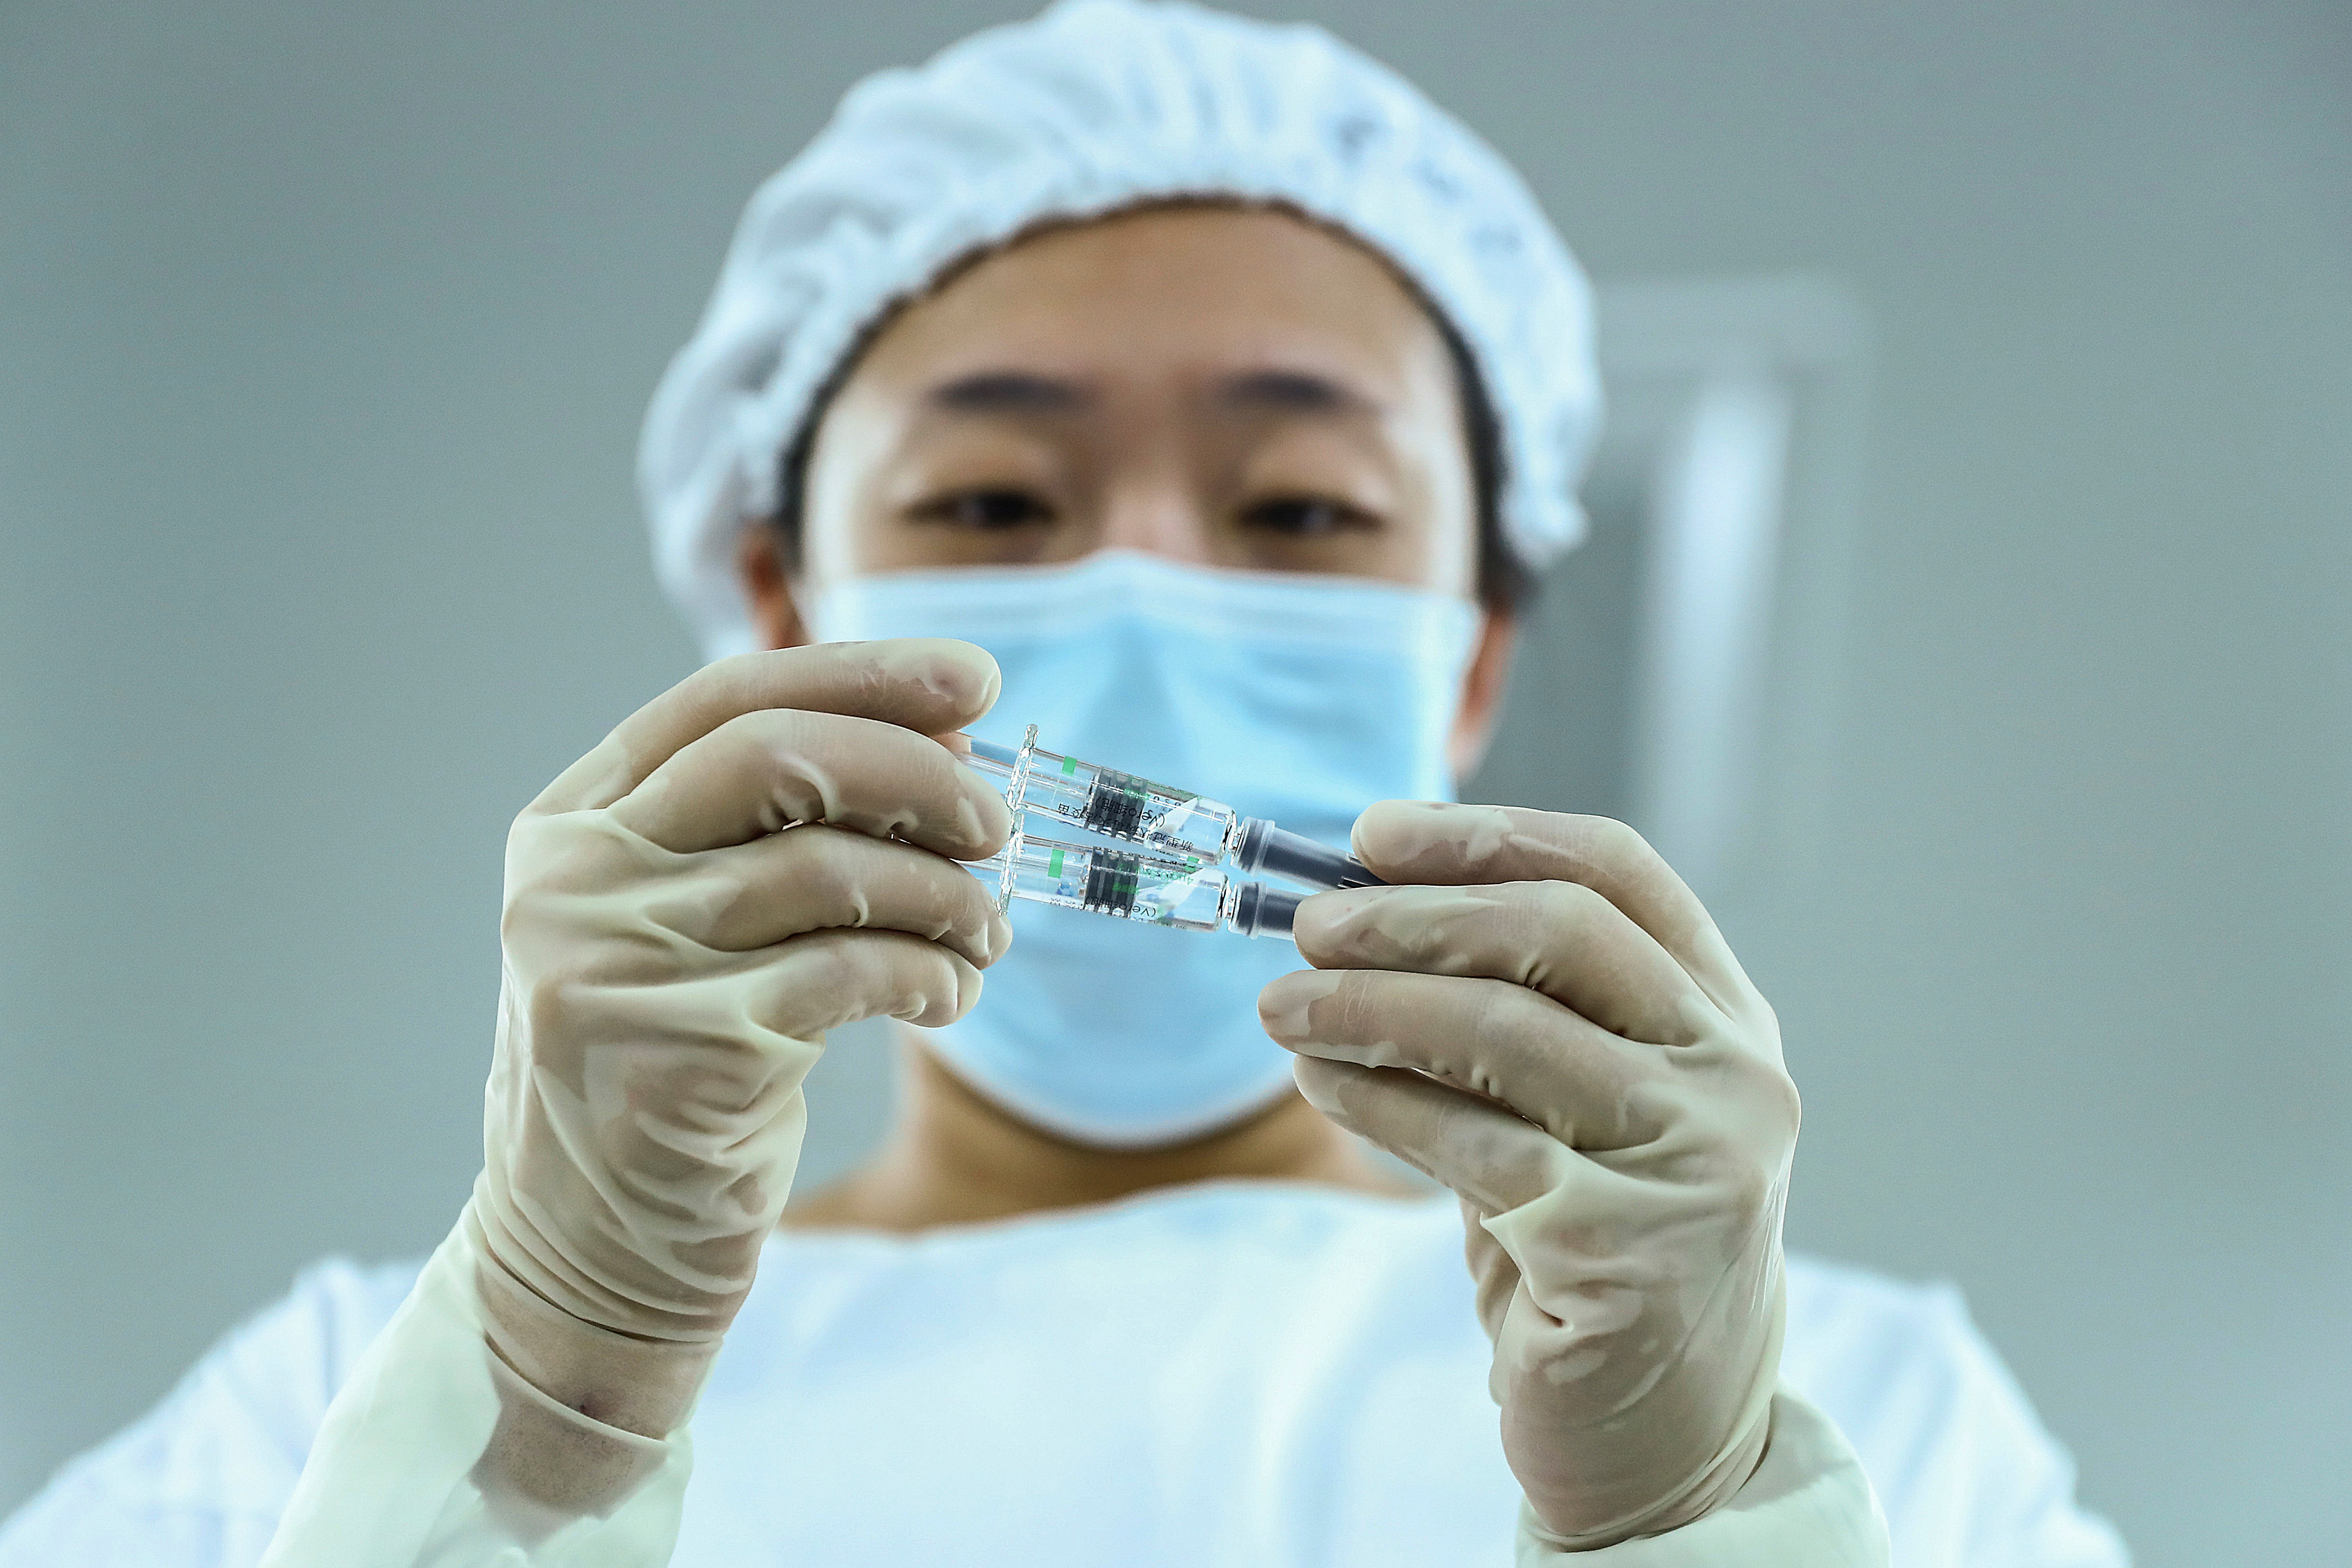 China greenlights first homegrown COVID-19 vaccine